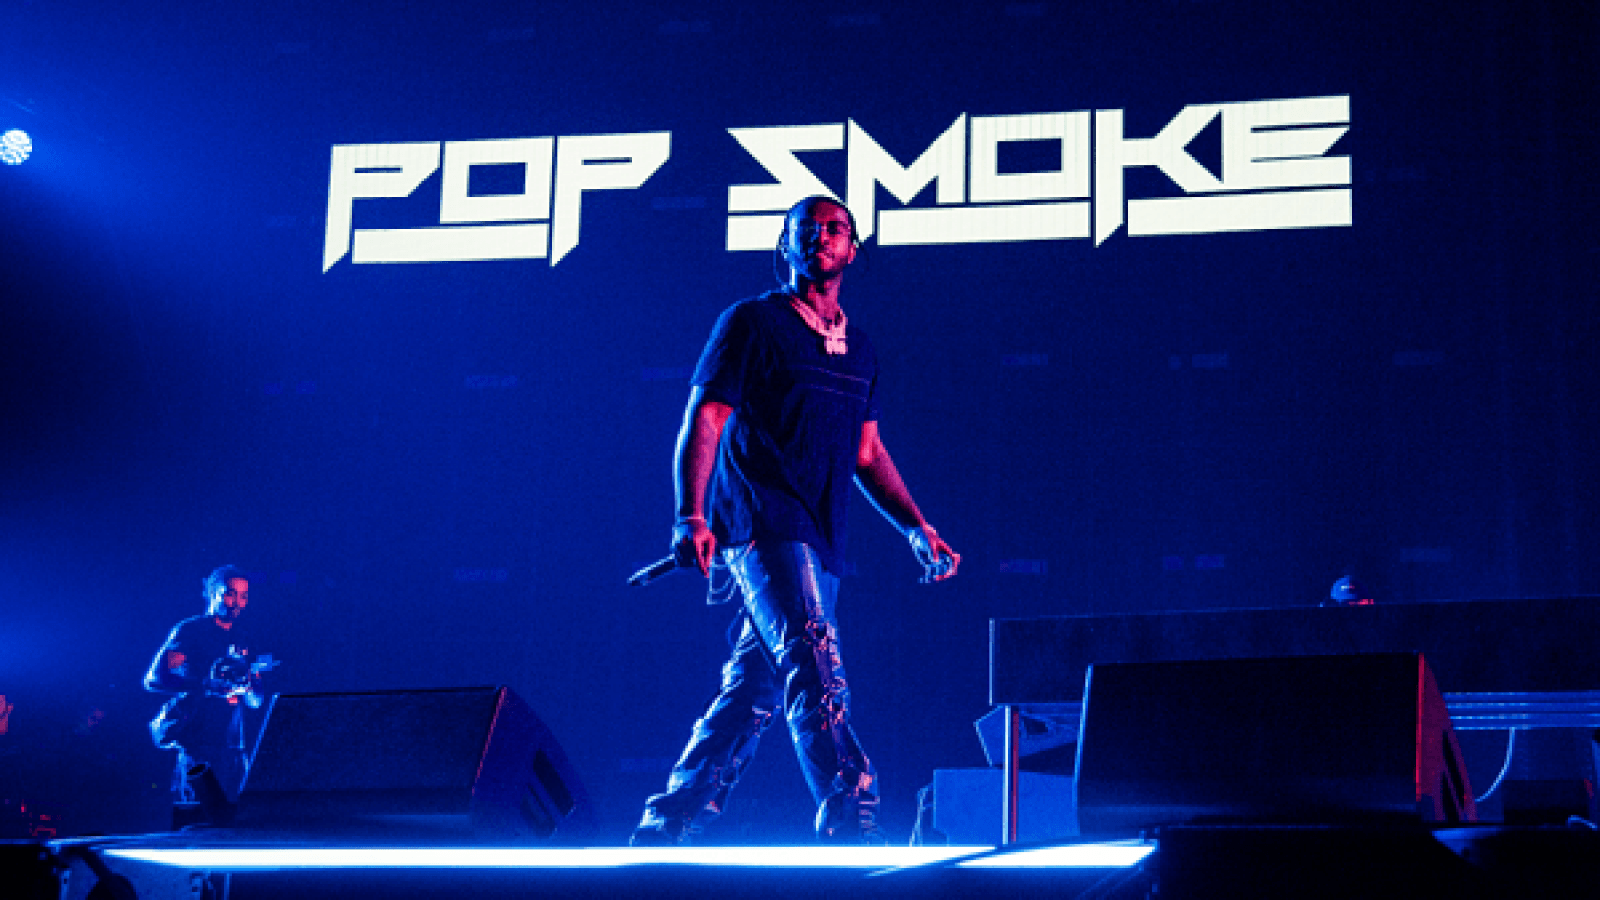 A man is standing on stage with music playing - Pop Smoke